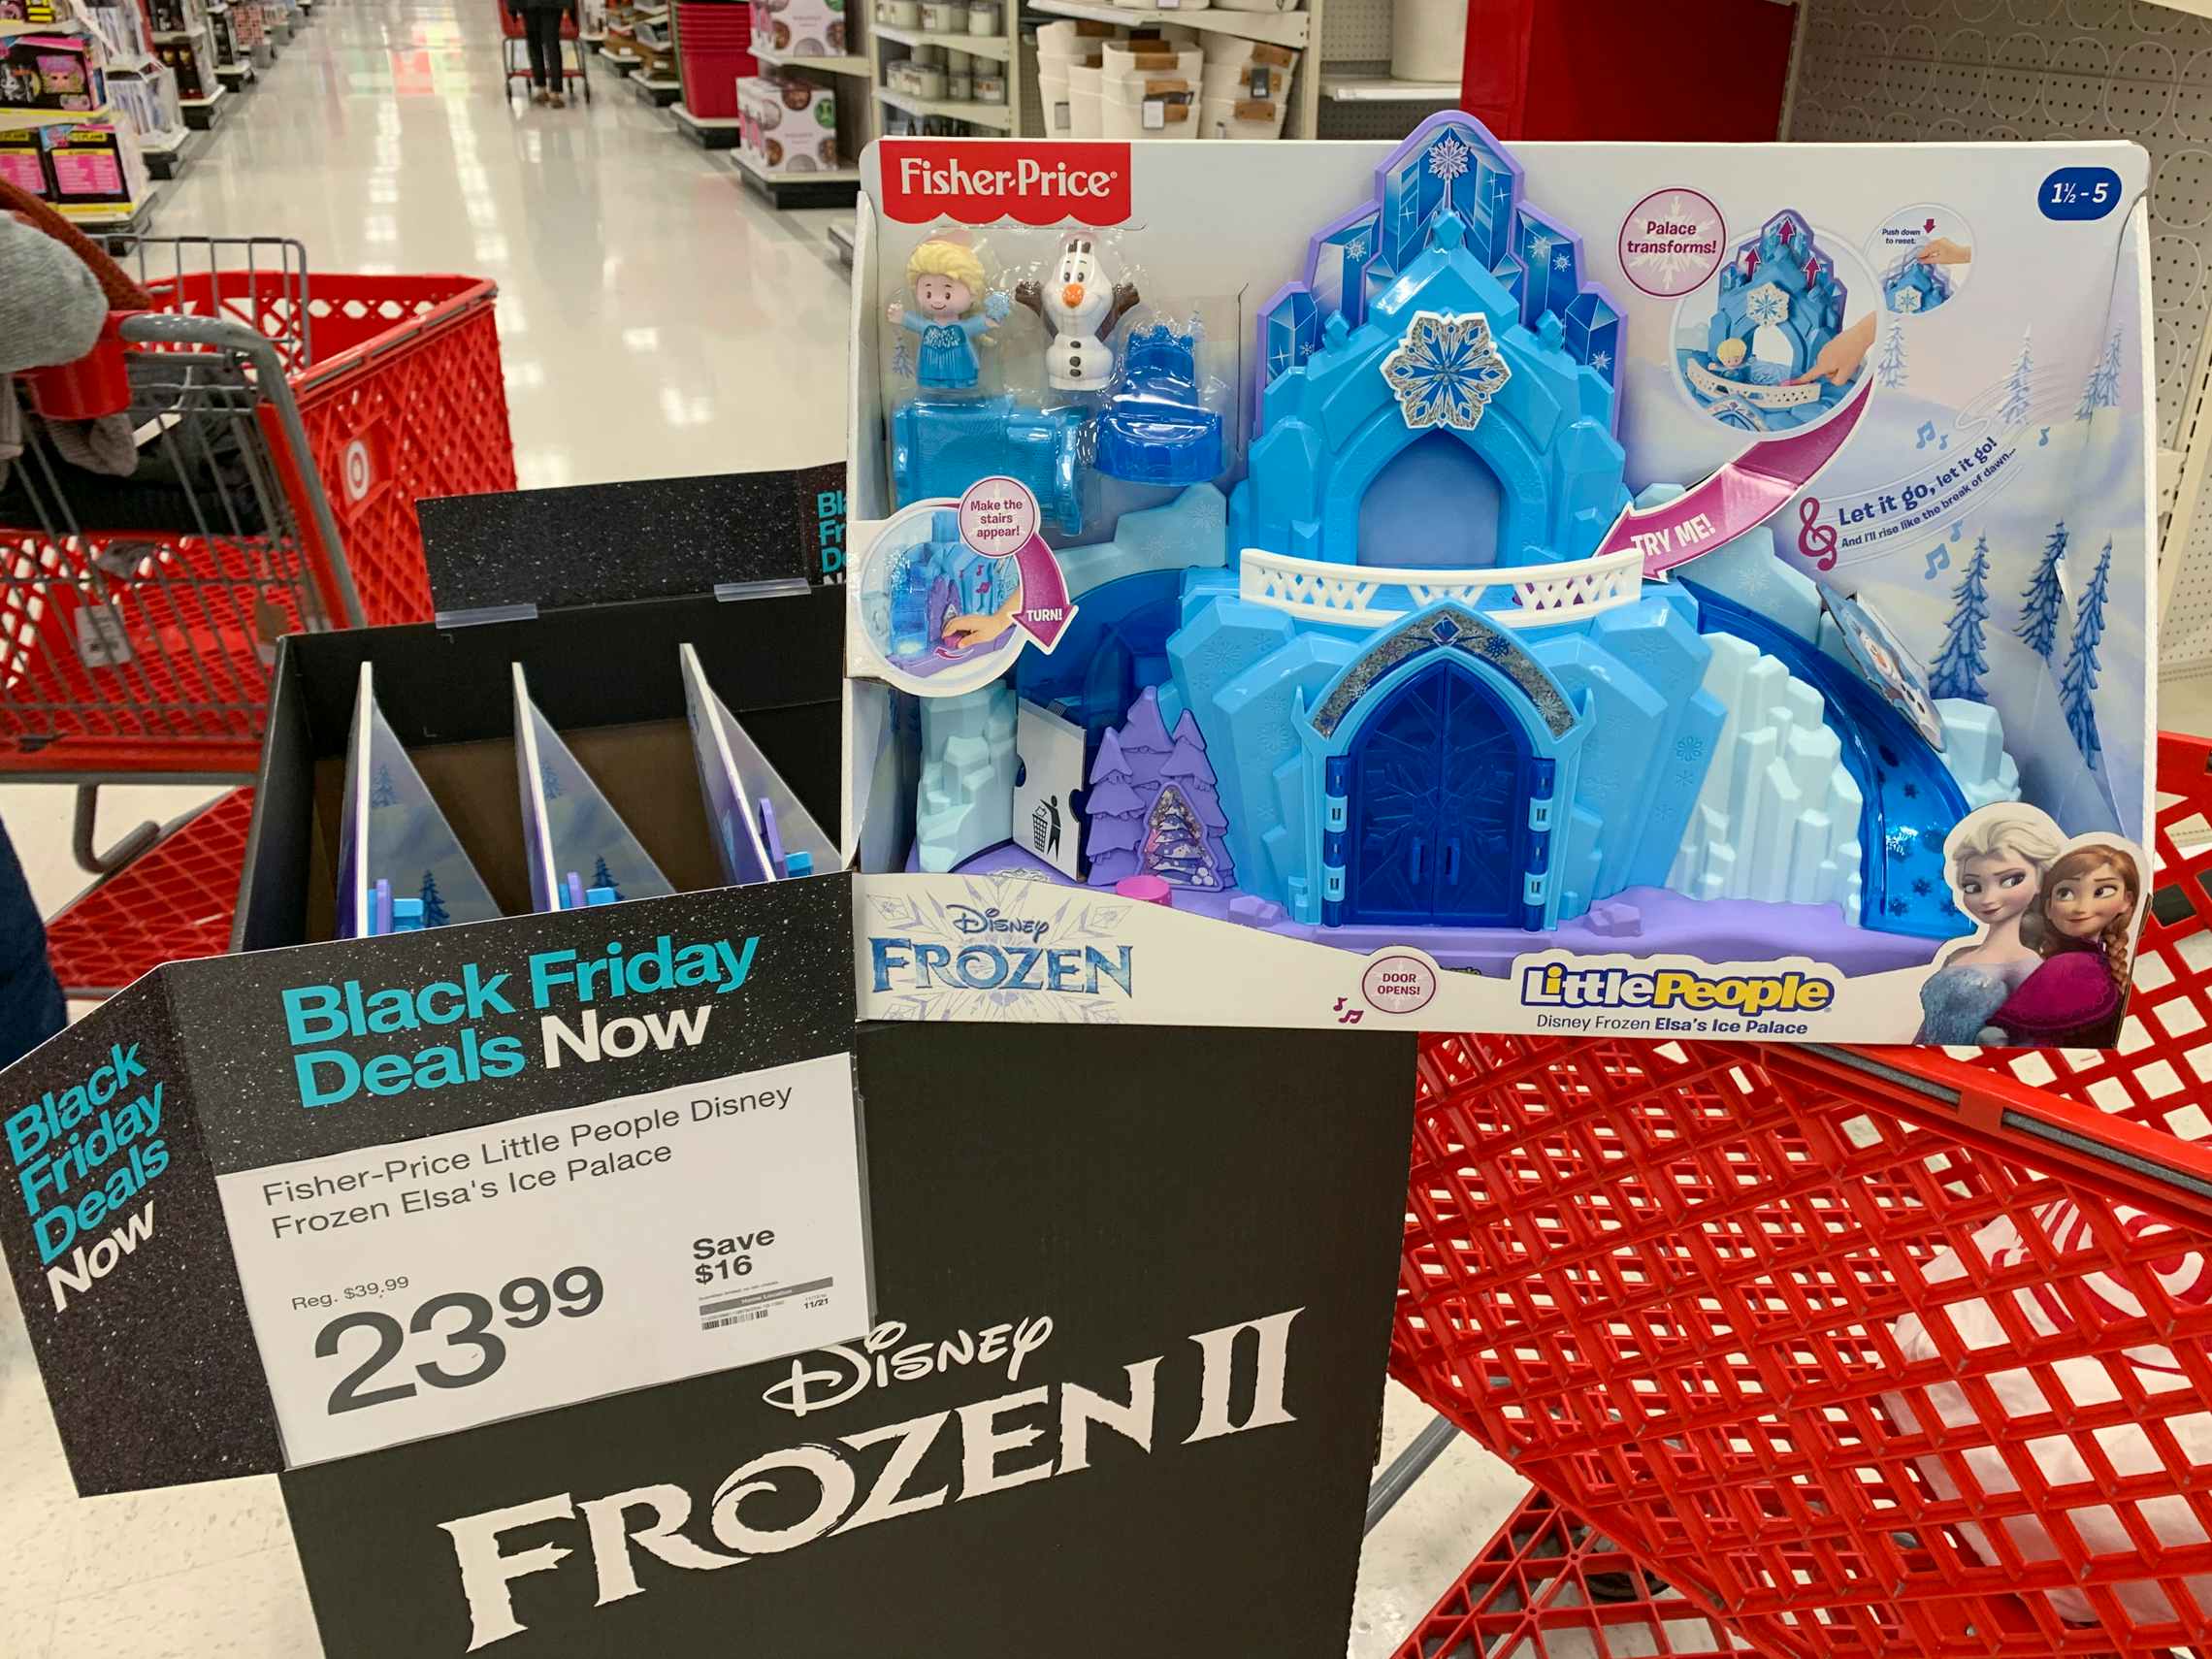 Disney Frozen little people ice palace toy next to a black friday sales tag reading $23.99 at Target